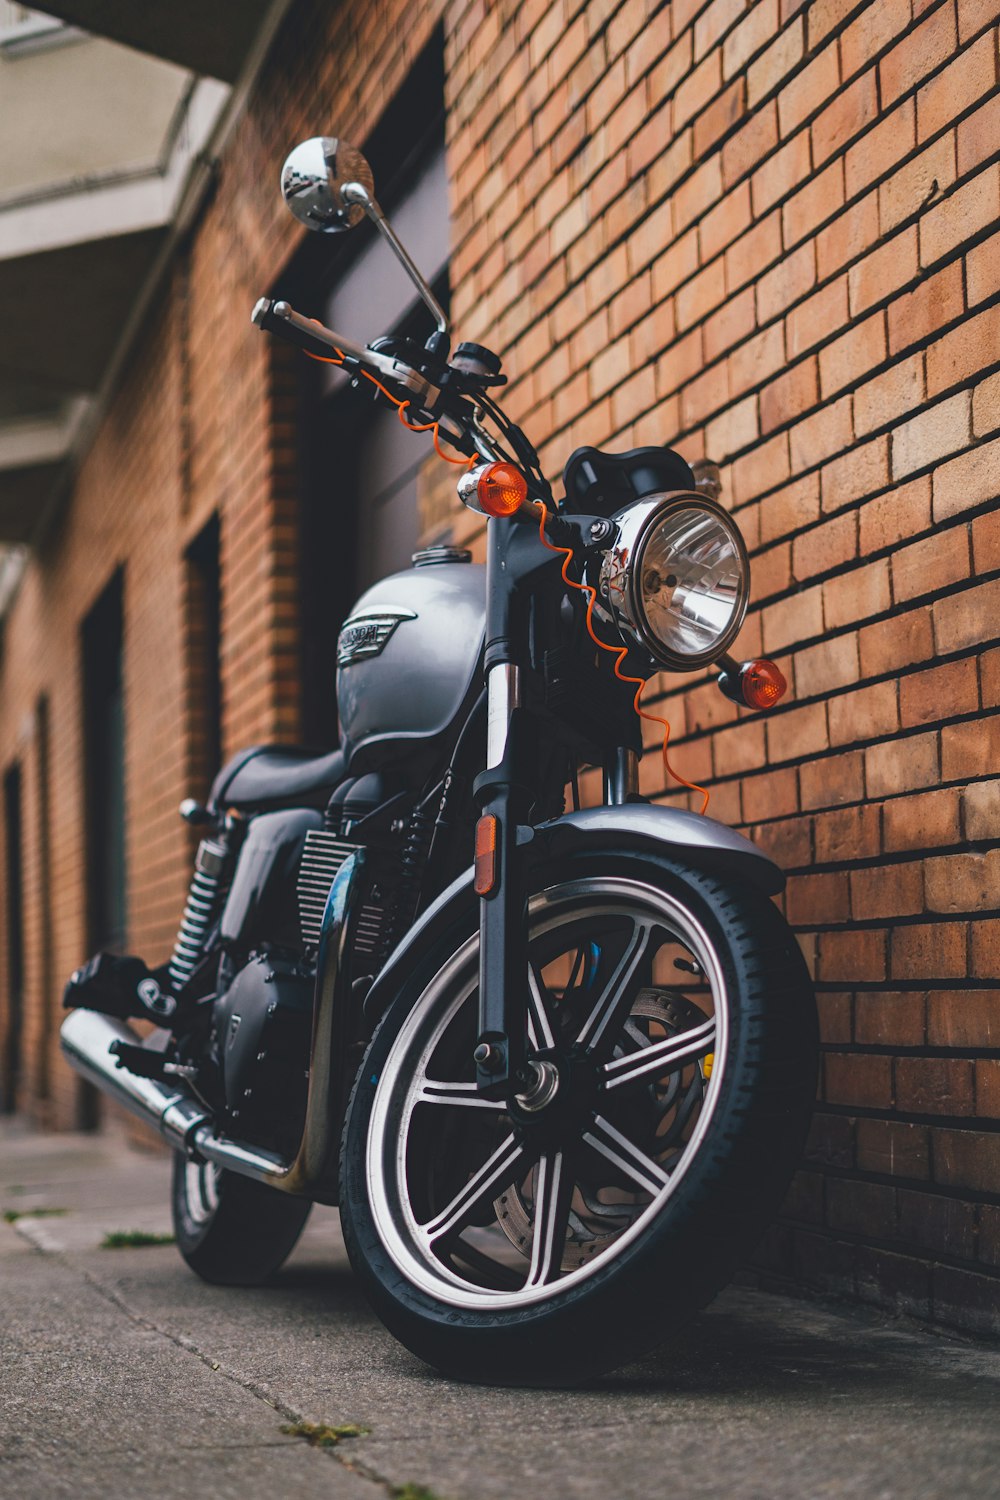 a motorcycle parked next to a brick wall